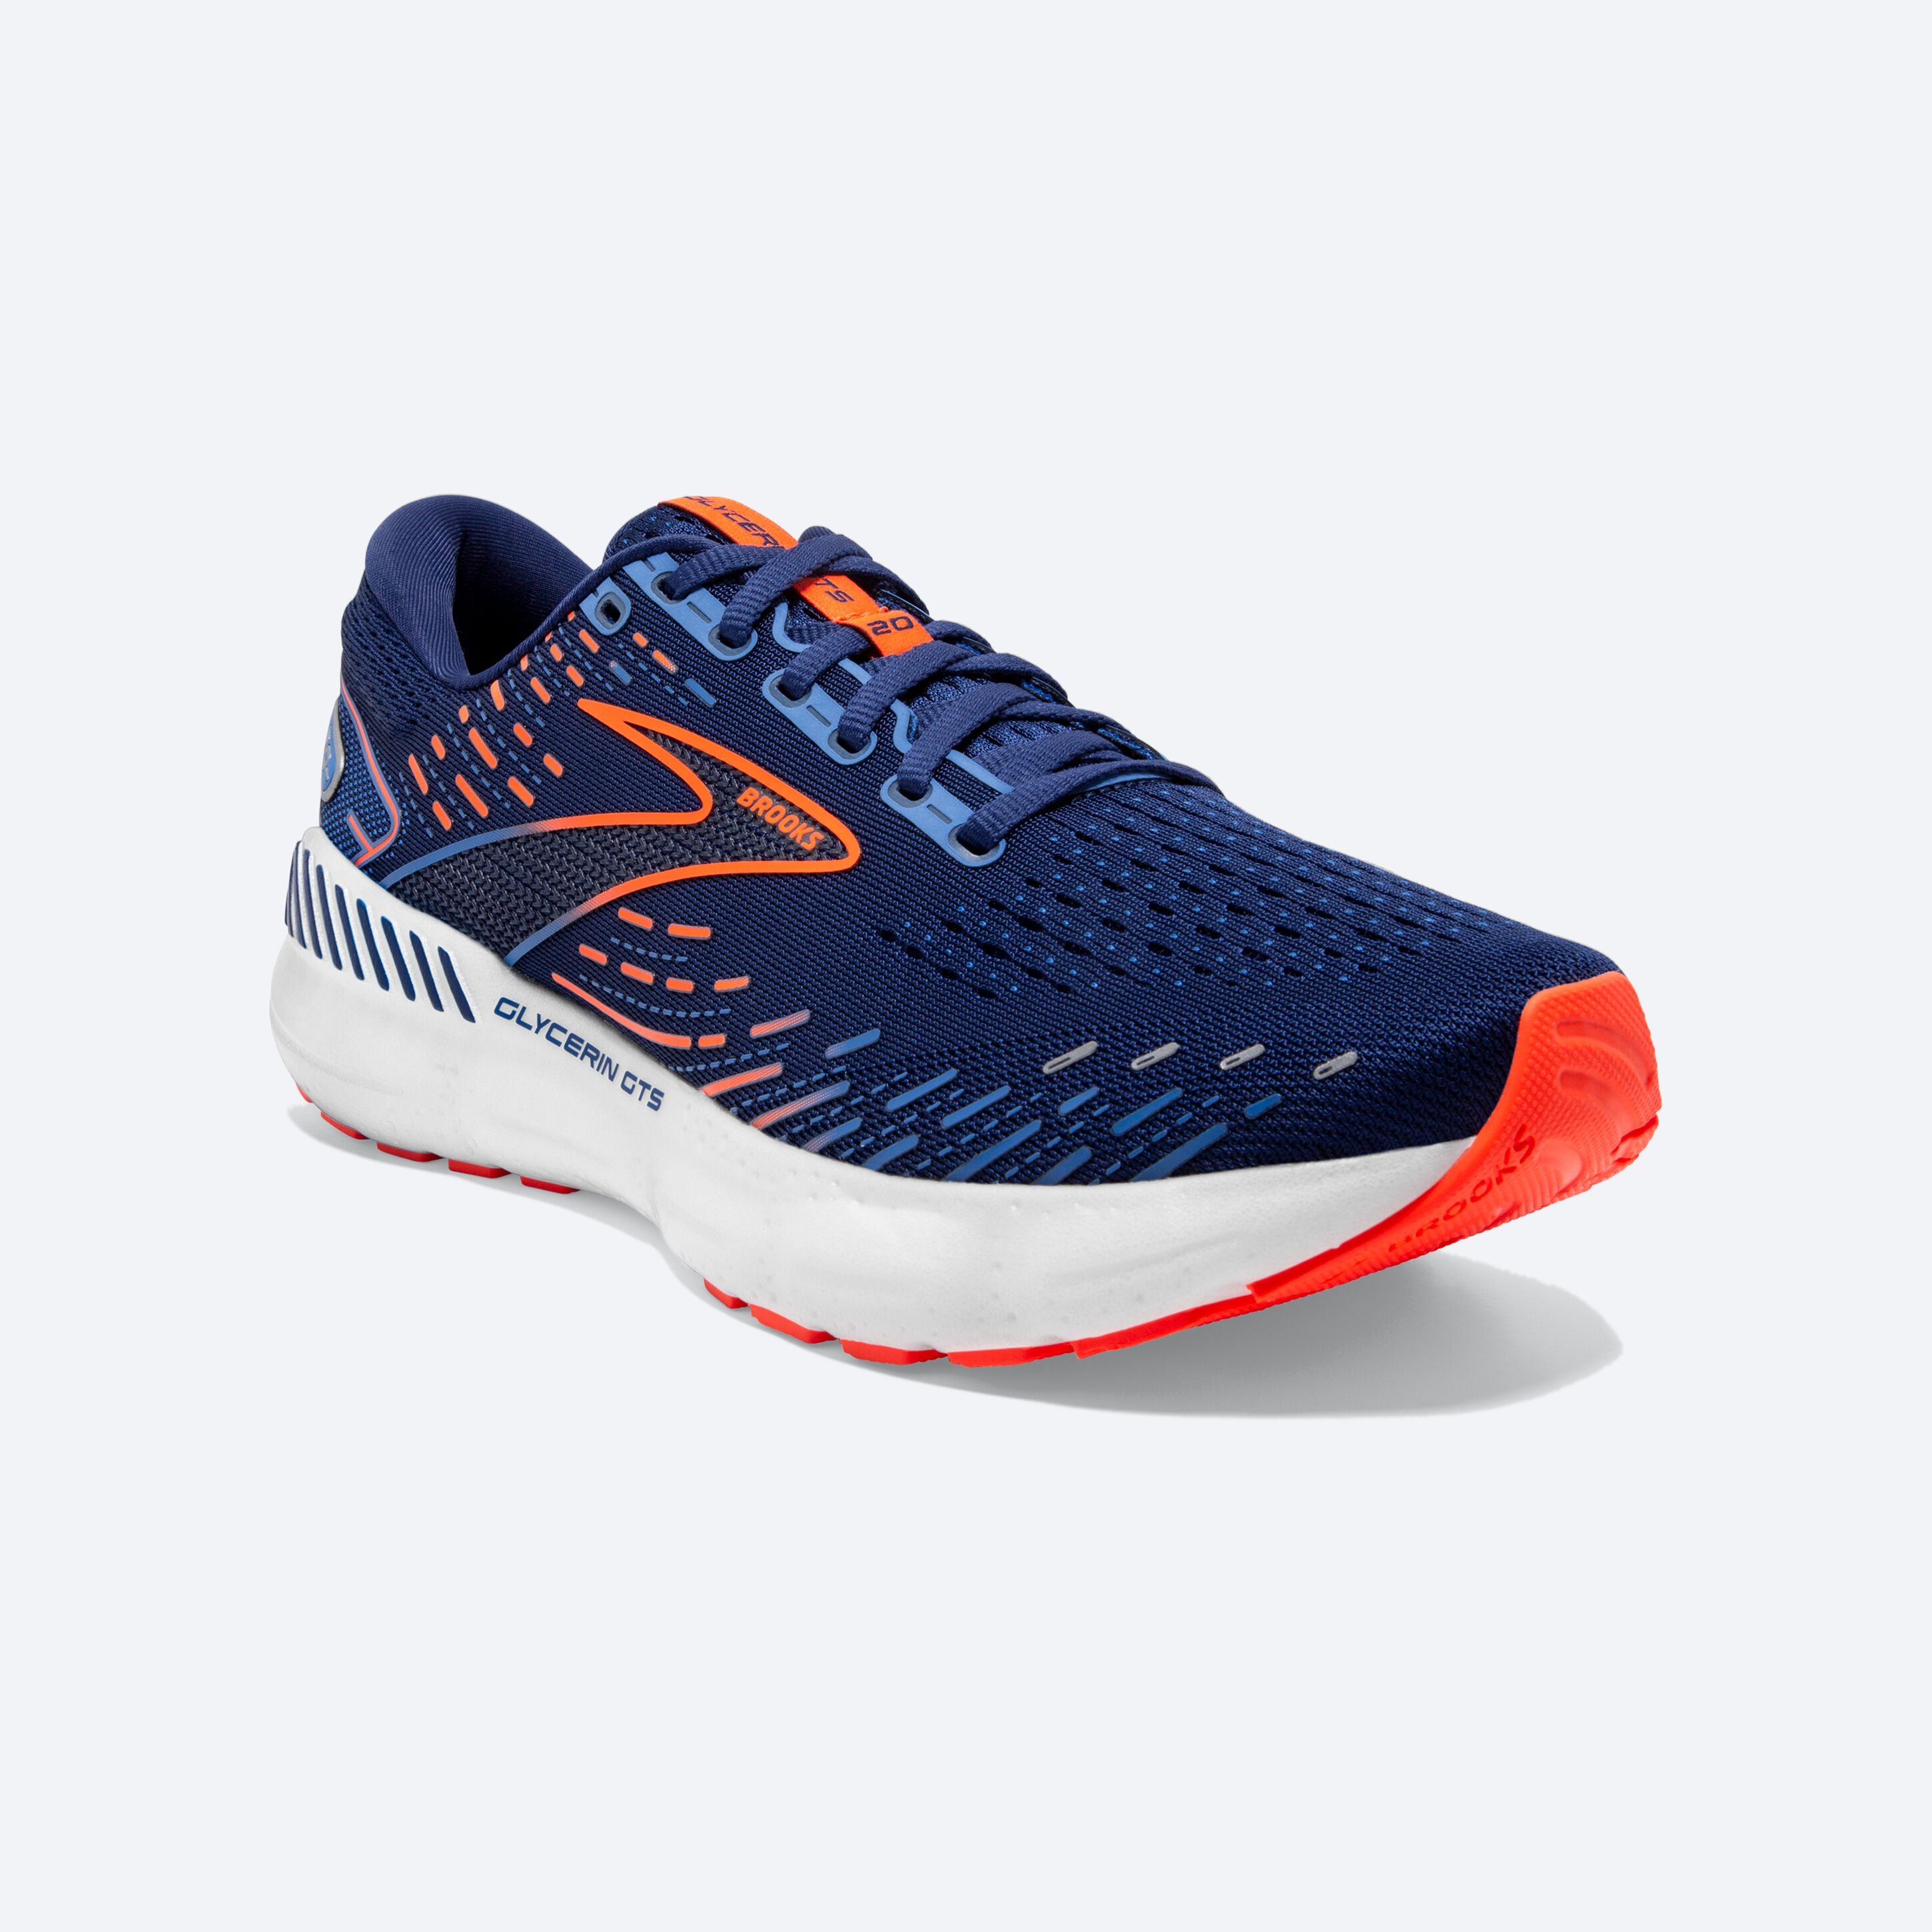 Front angle view of the Men's Glycerin GTS 20 in Blue Depths/Palace Blue/Orange